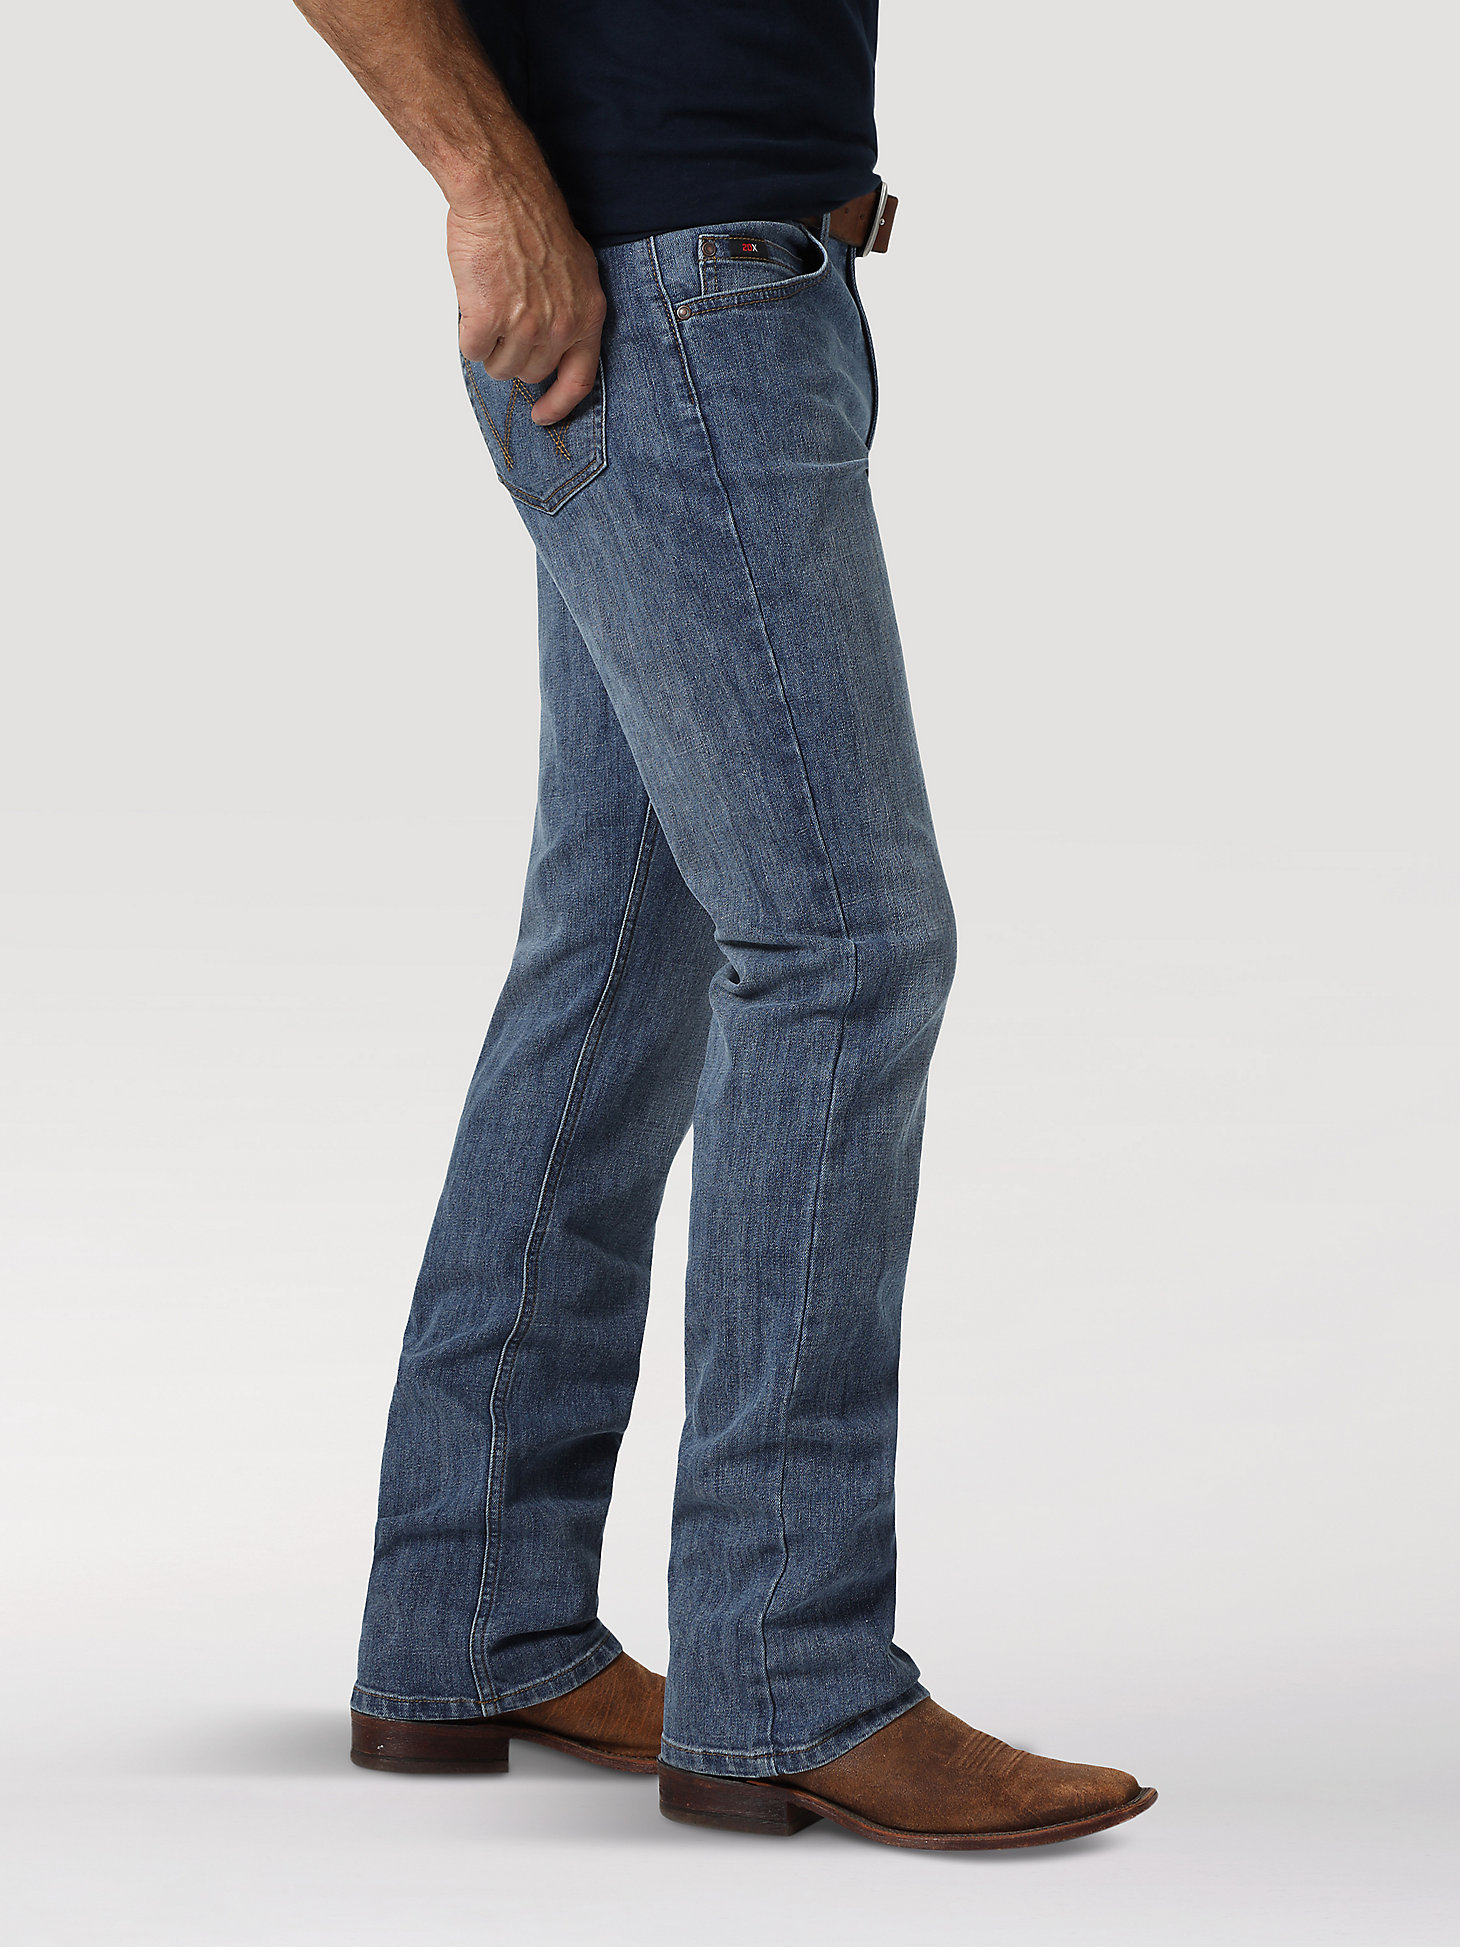 Wrangler Mens Tall 20X Competition Slim Fit Jean 